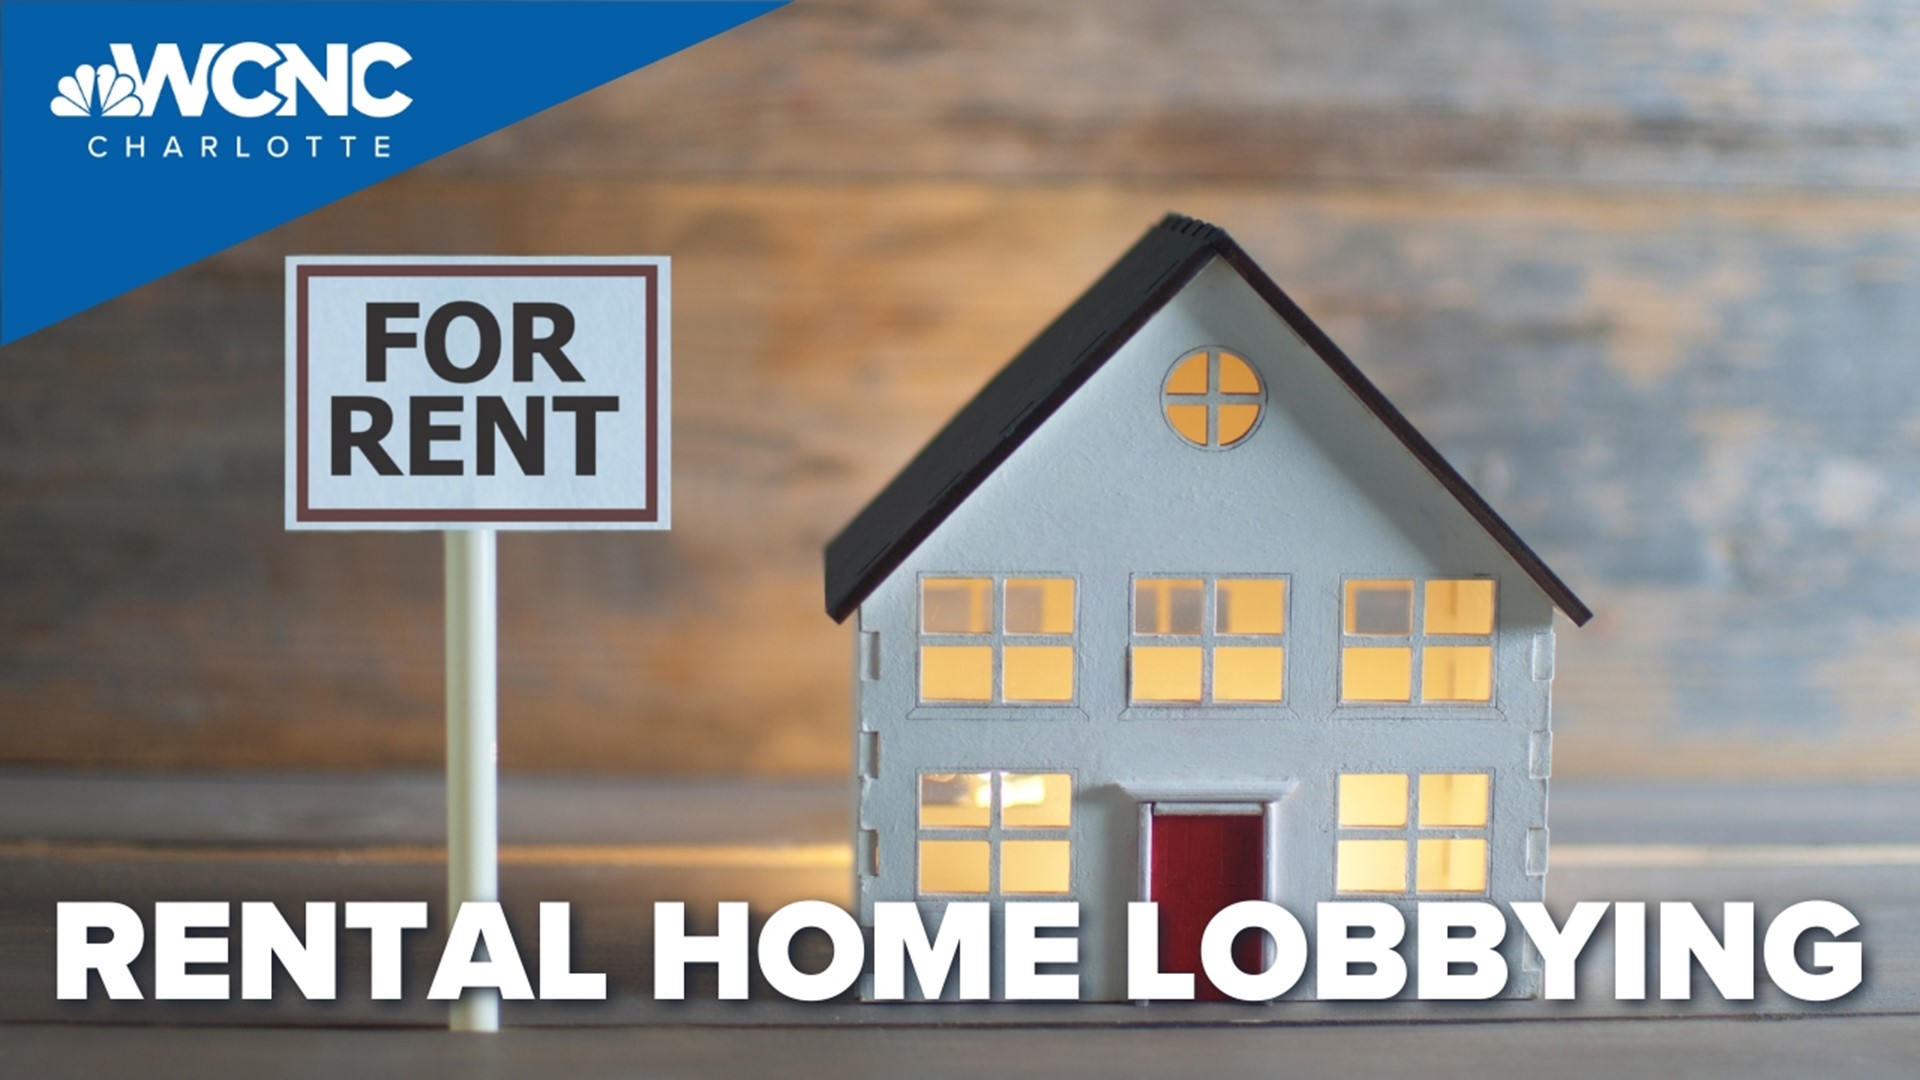 The trade group responsible for lobbying for the single-family rental industry recently opened its first local chapter. The organization chose North Carolina.